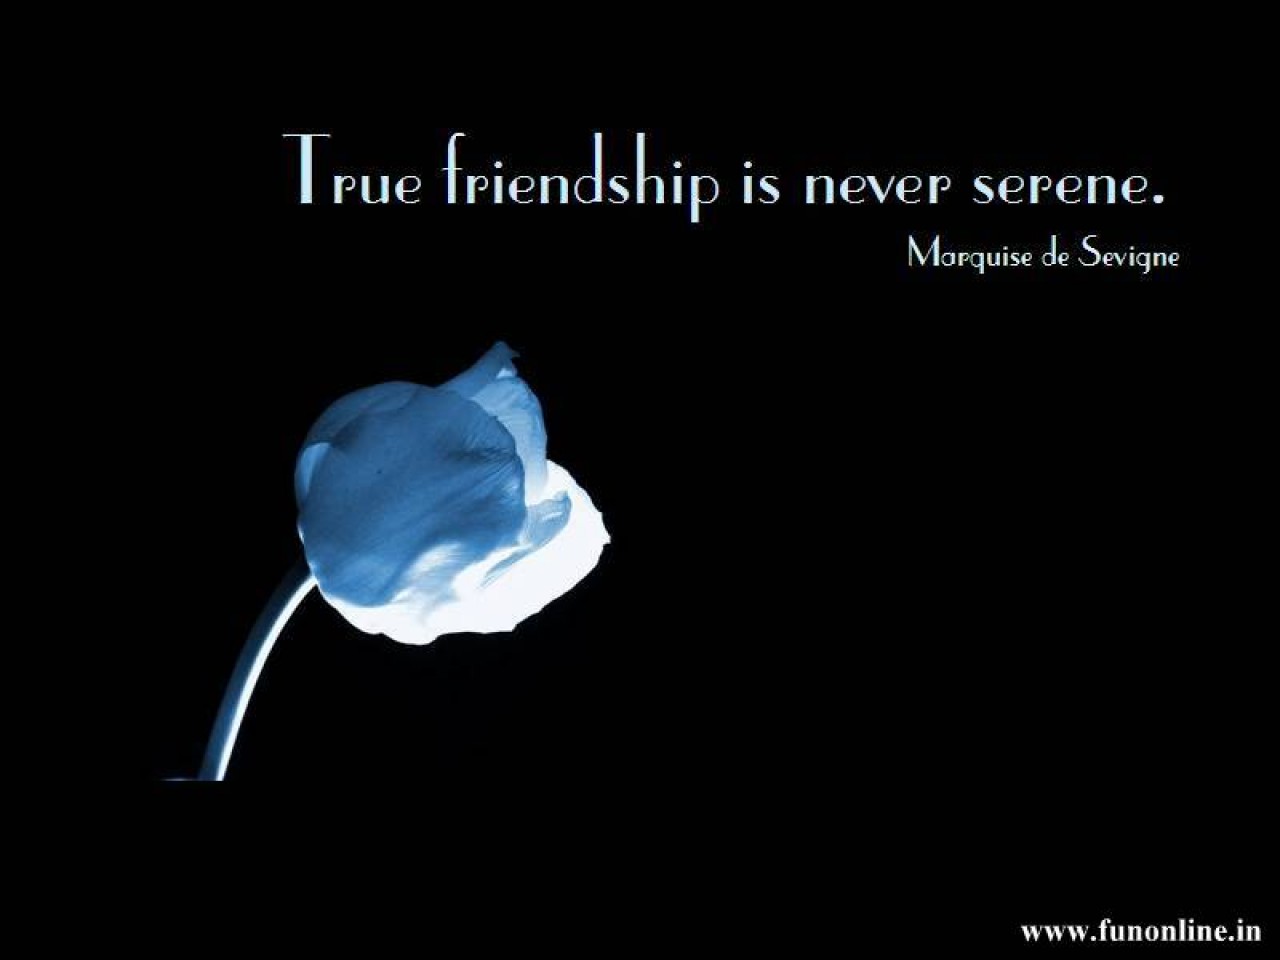 Friendship Wallpapers Lovely Friendship Wallpapers with Quotes